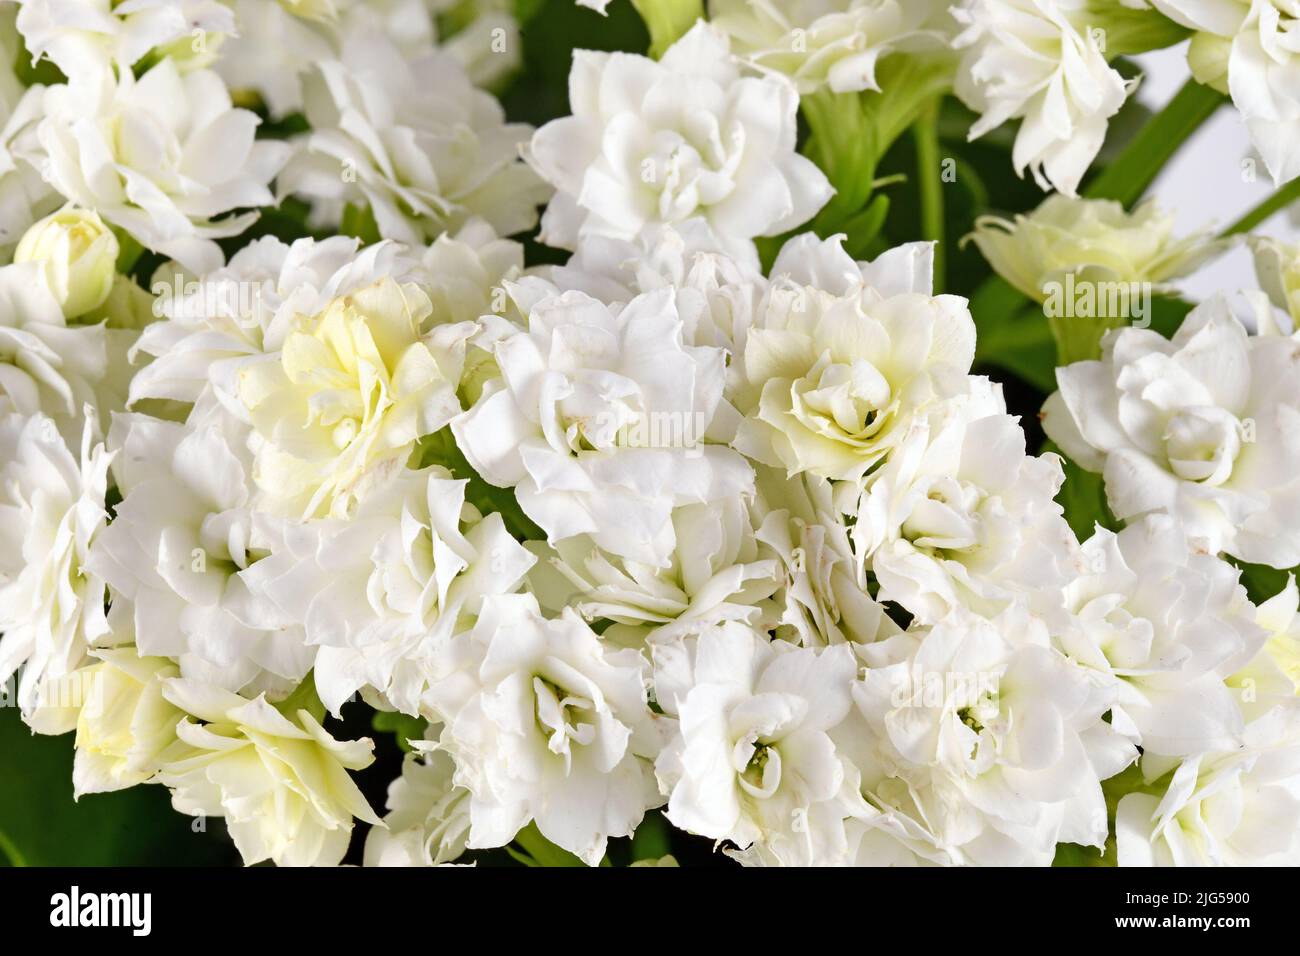 Top view of white Kalanchoe flowers of  succulent plant Stock Photo